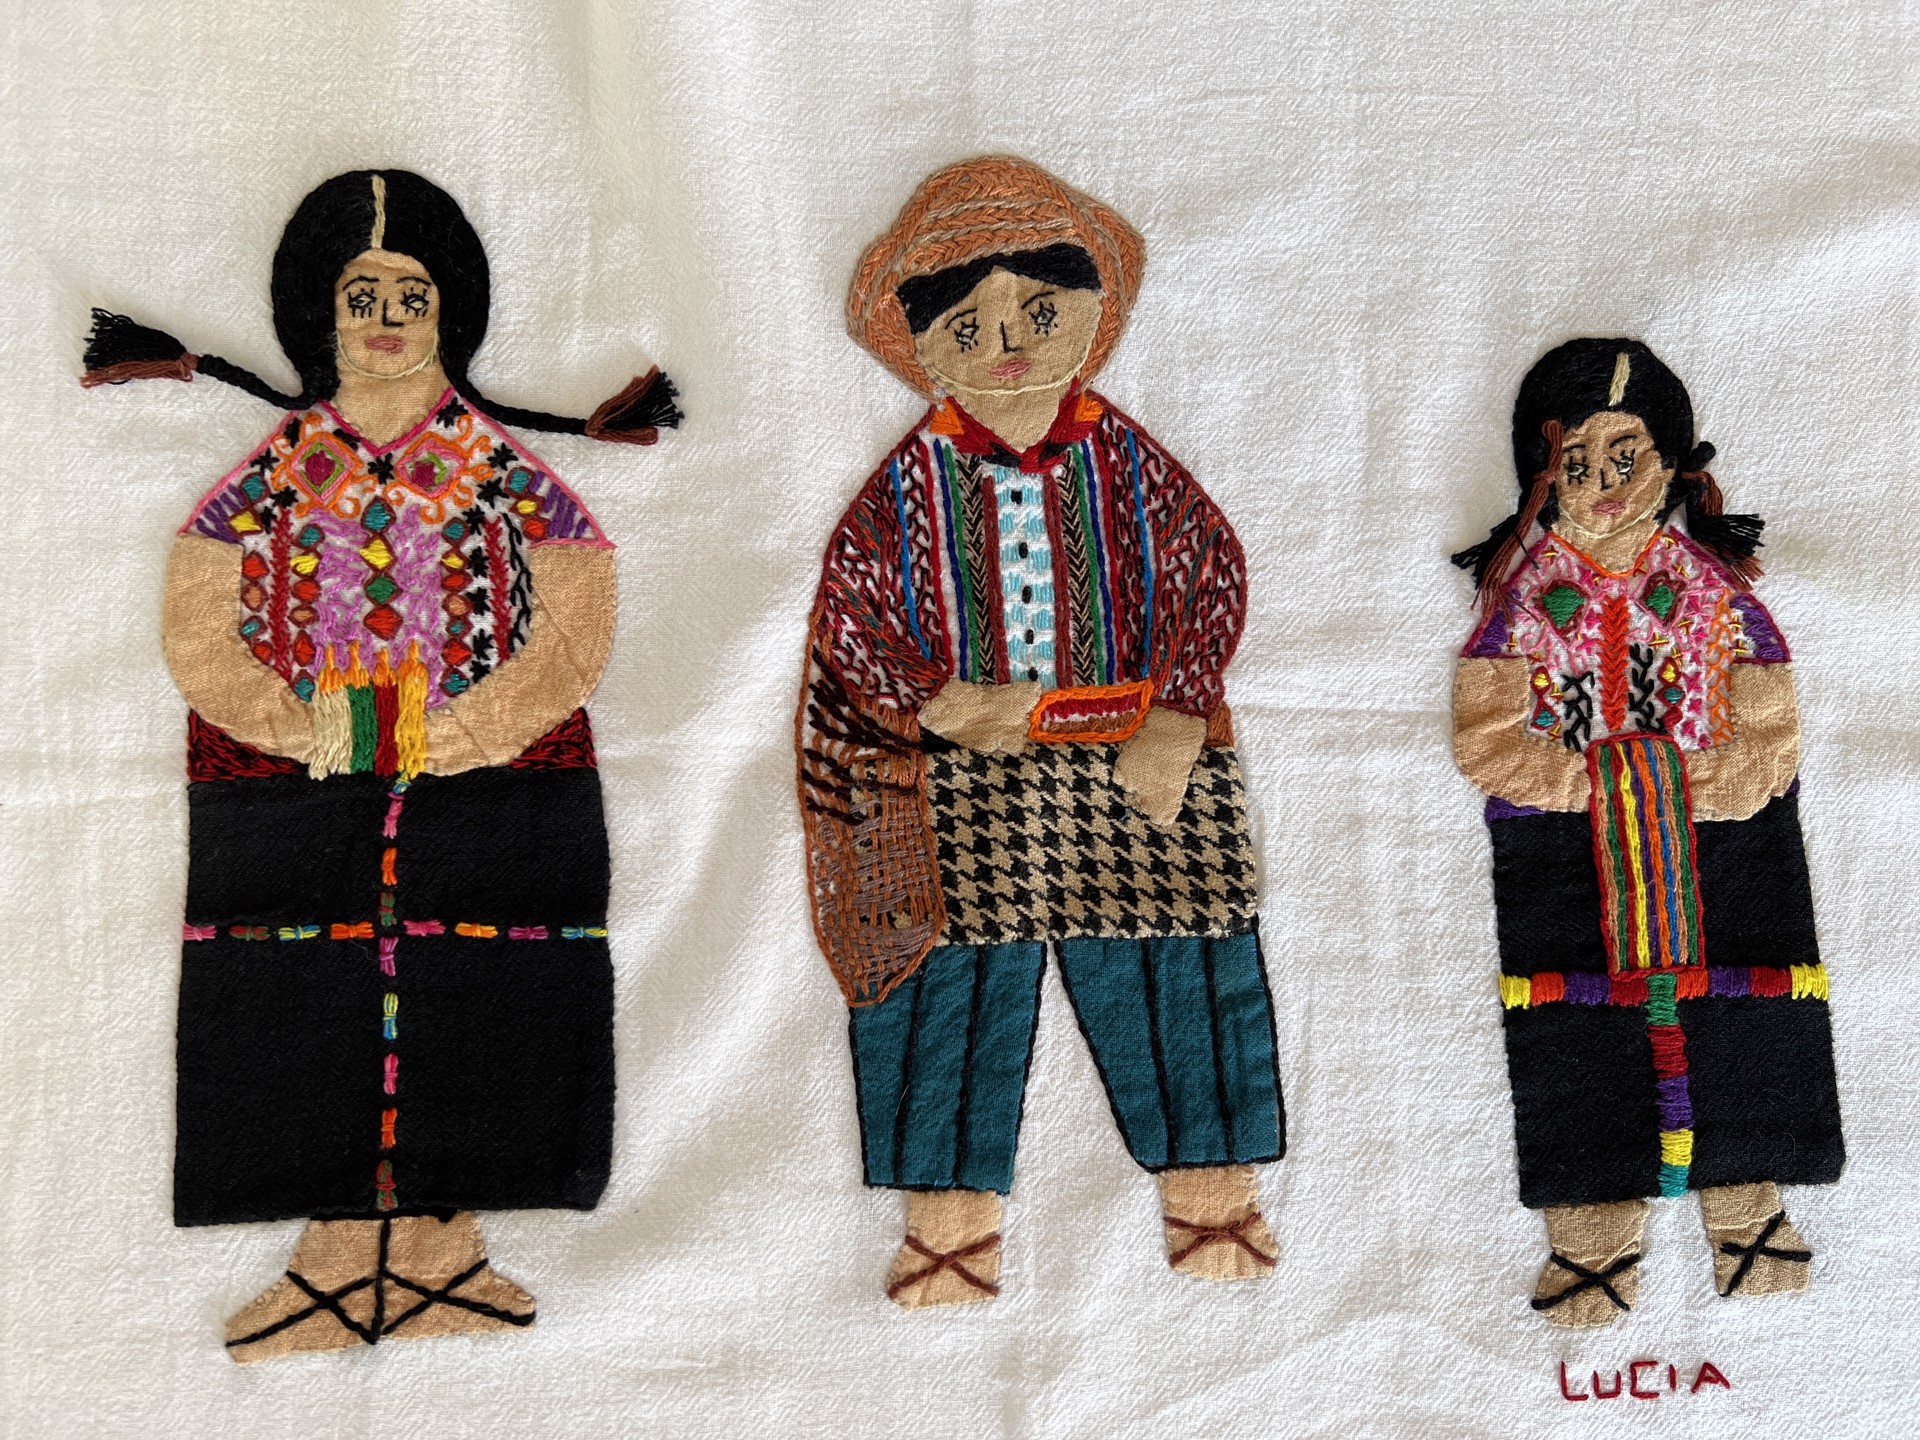 Catarina, Manuel, and Susana from Nahualá by Multicolores